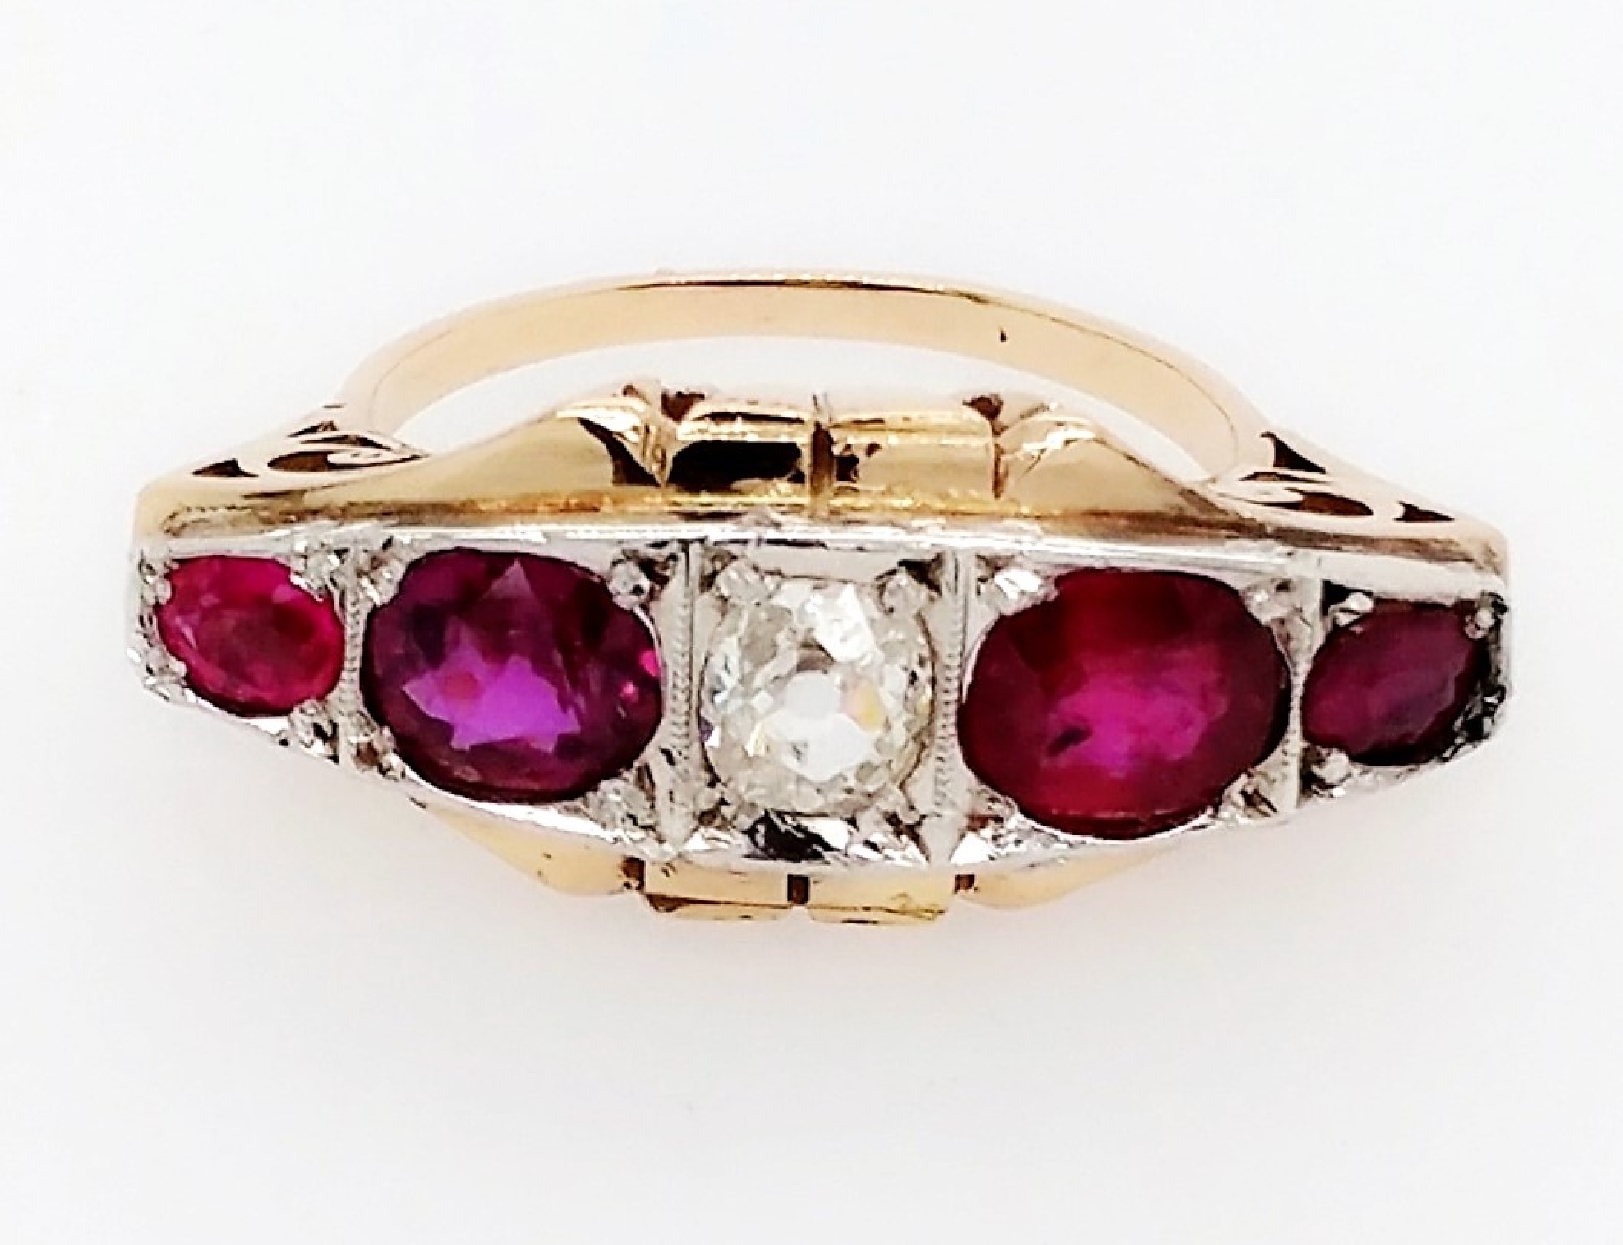 Antique 14k Two Tone Gold Ruby and Diamond Ring with Old Mine Cut Diamonds and Filigree Accents size 6.75